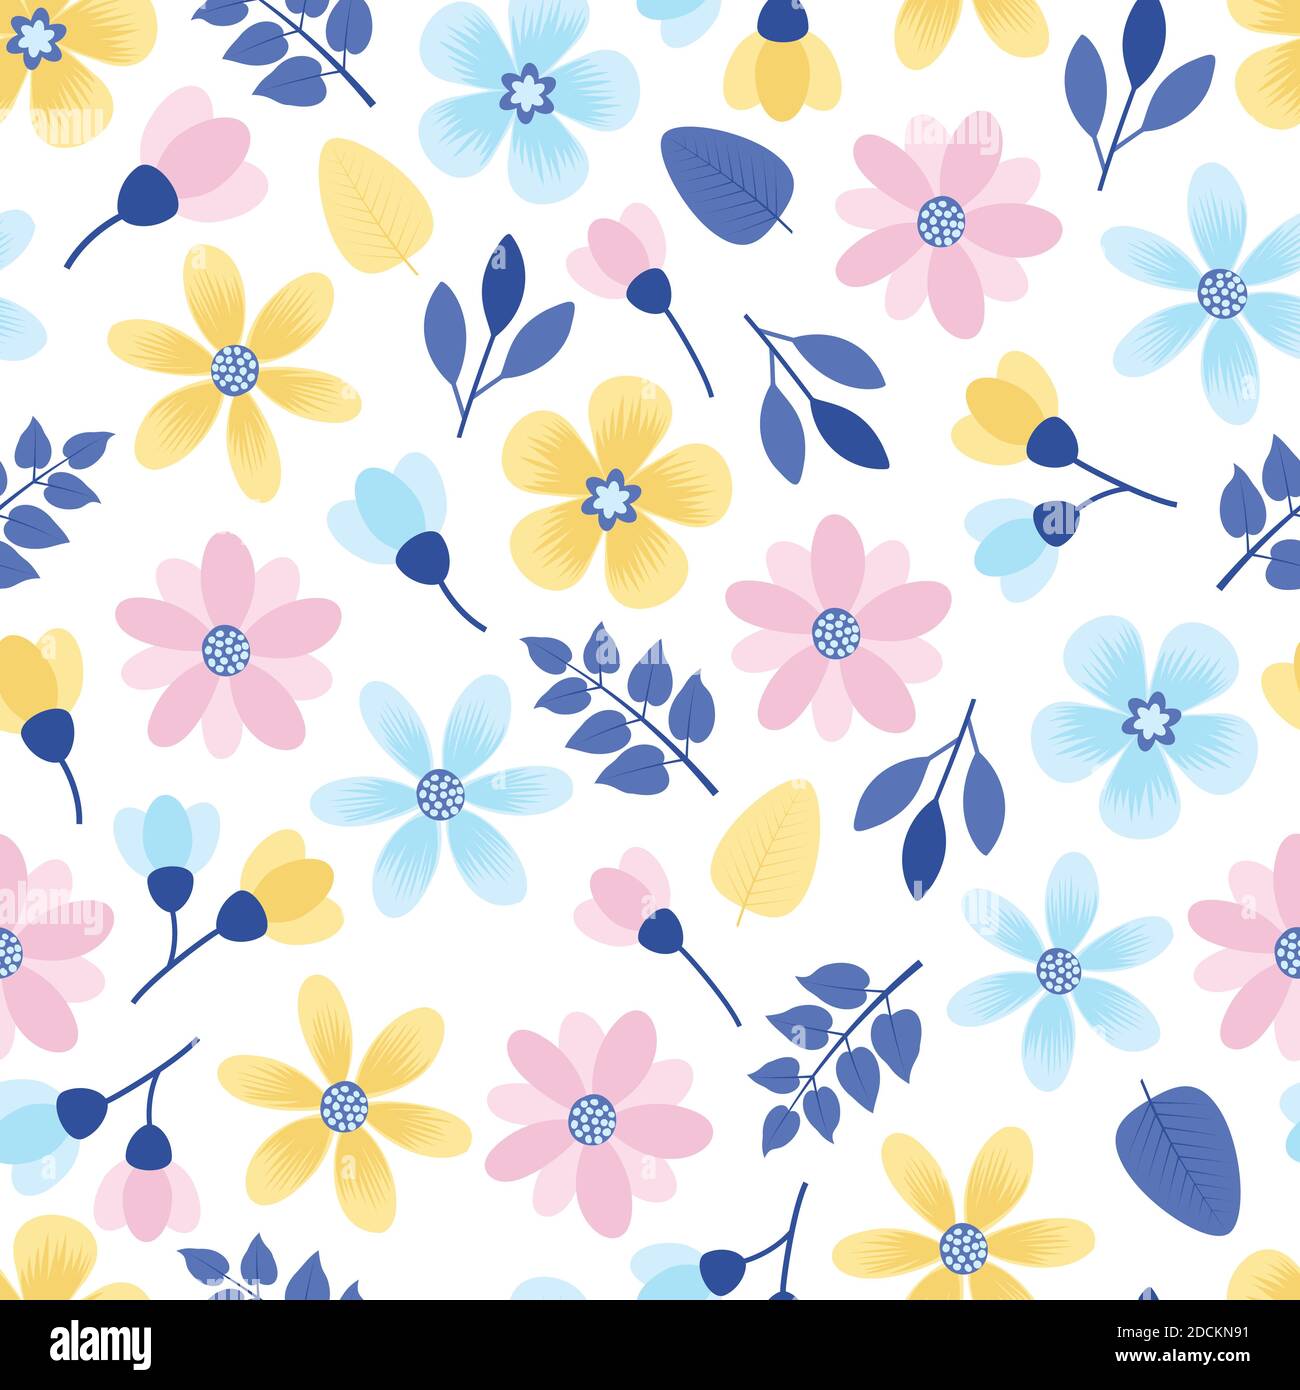 Elegant trendy ditsy floral texture vector repeating pattern